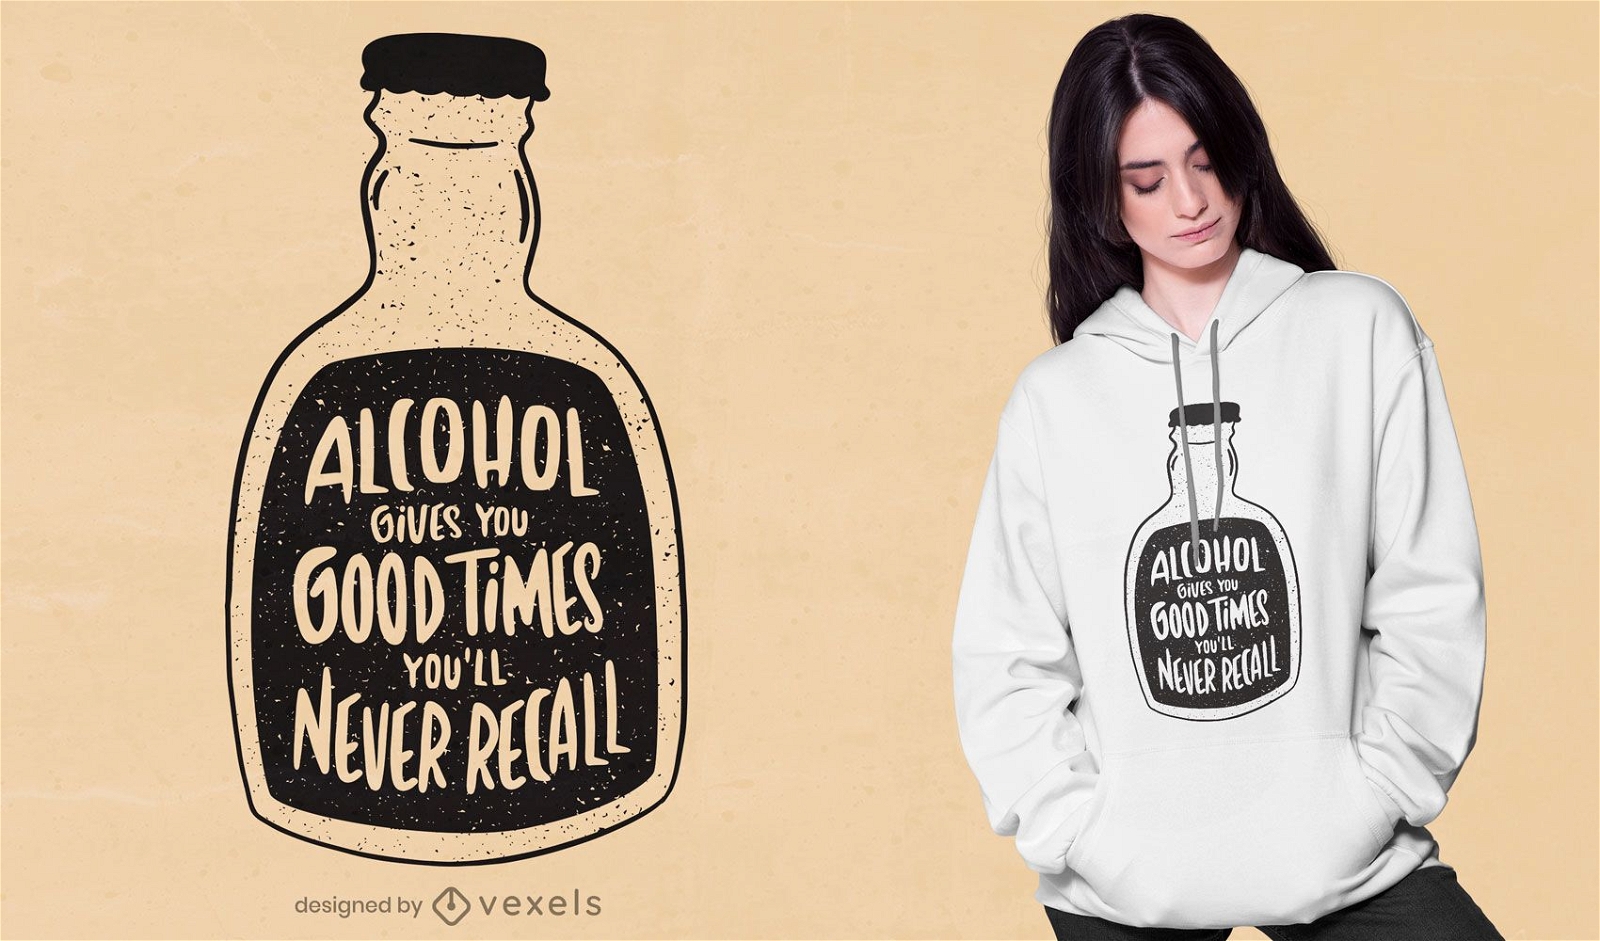 Alcohol gives good times t-shirt design